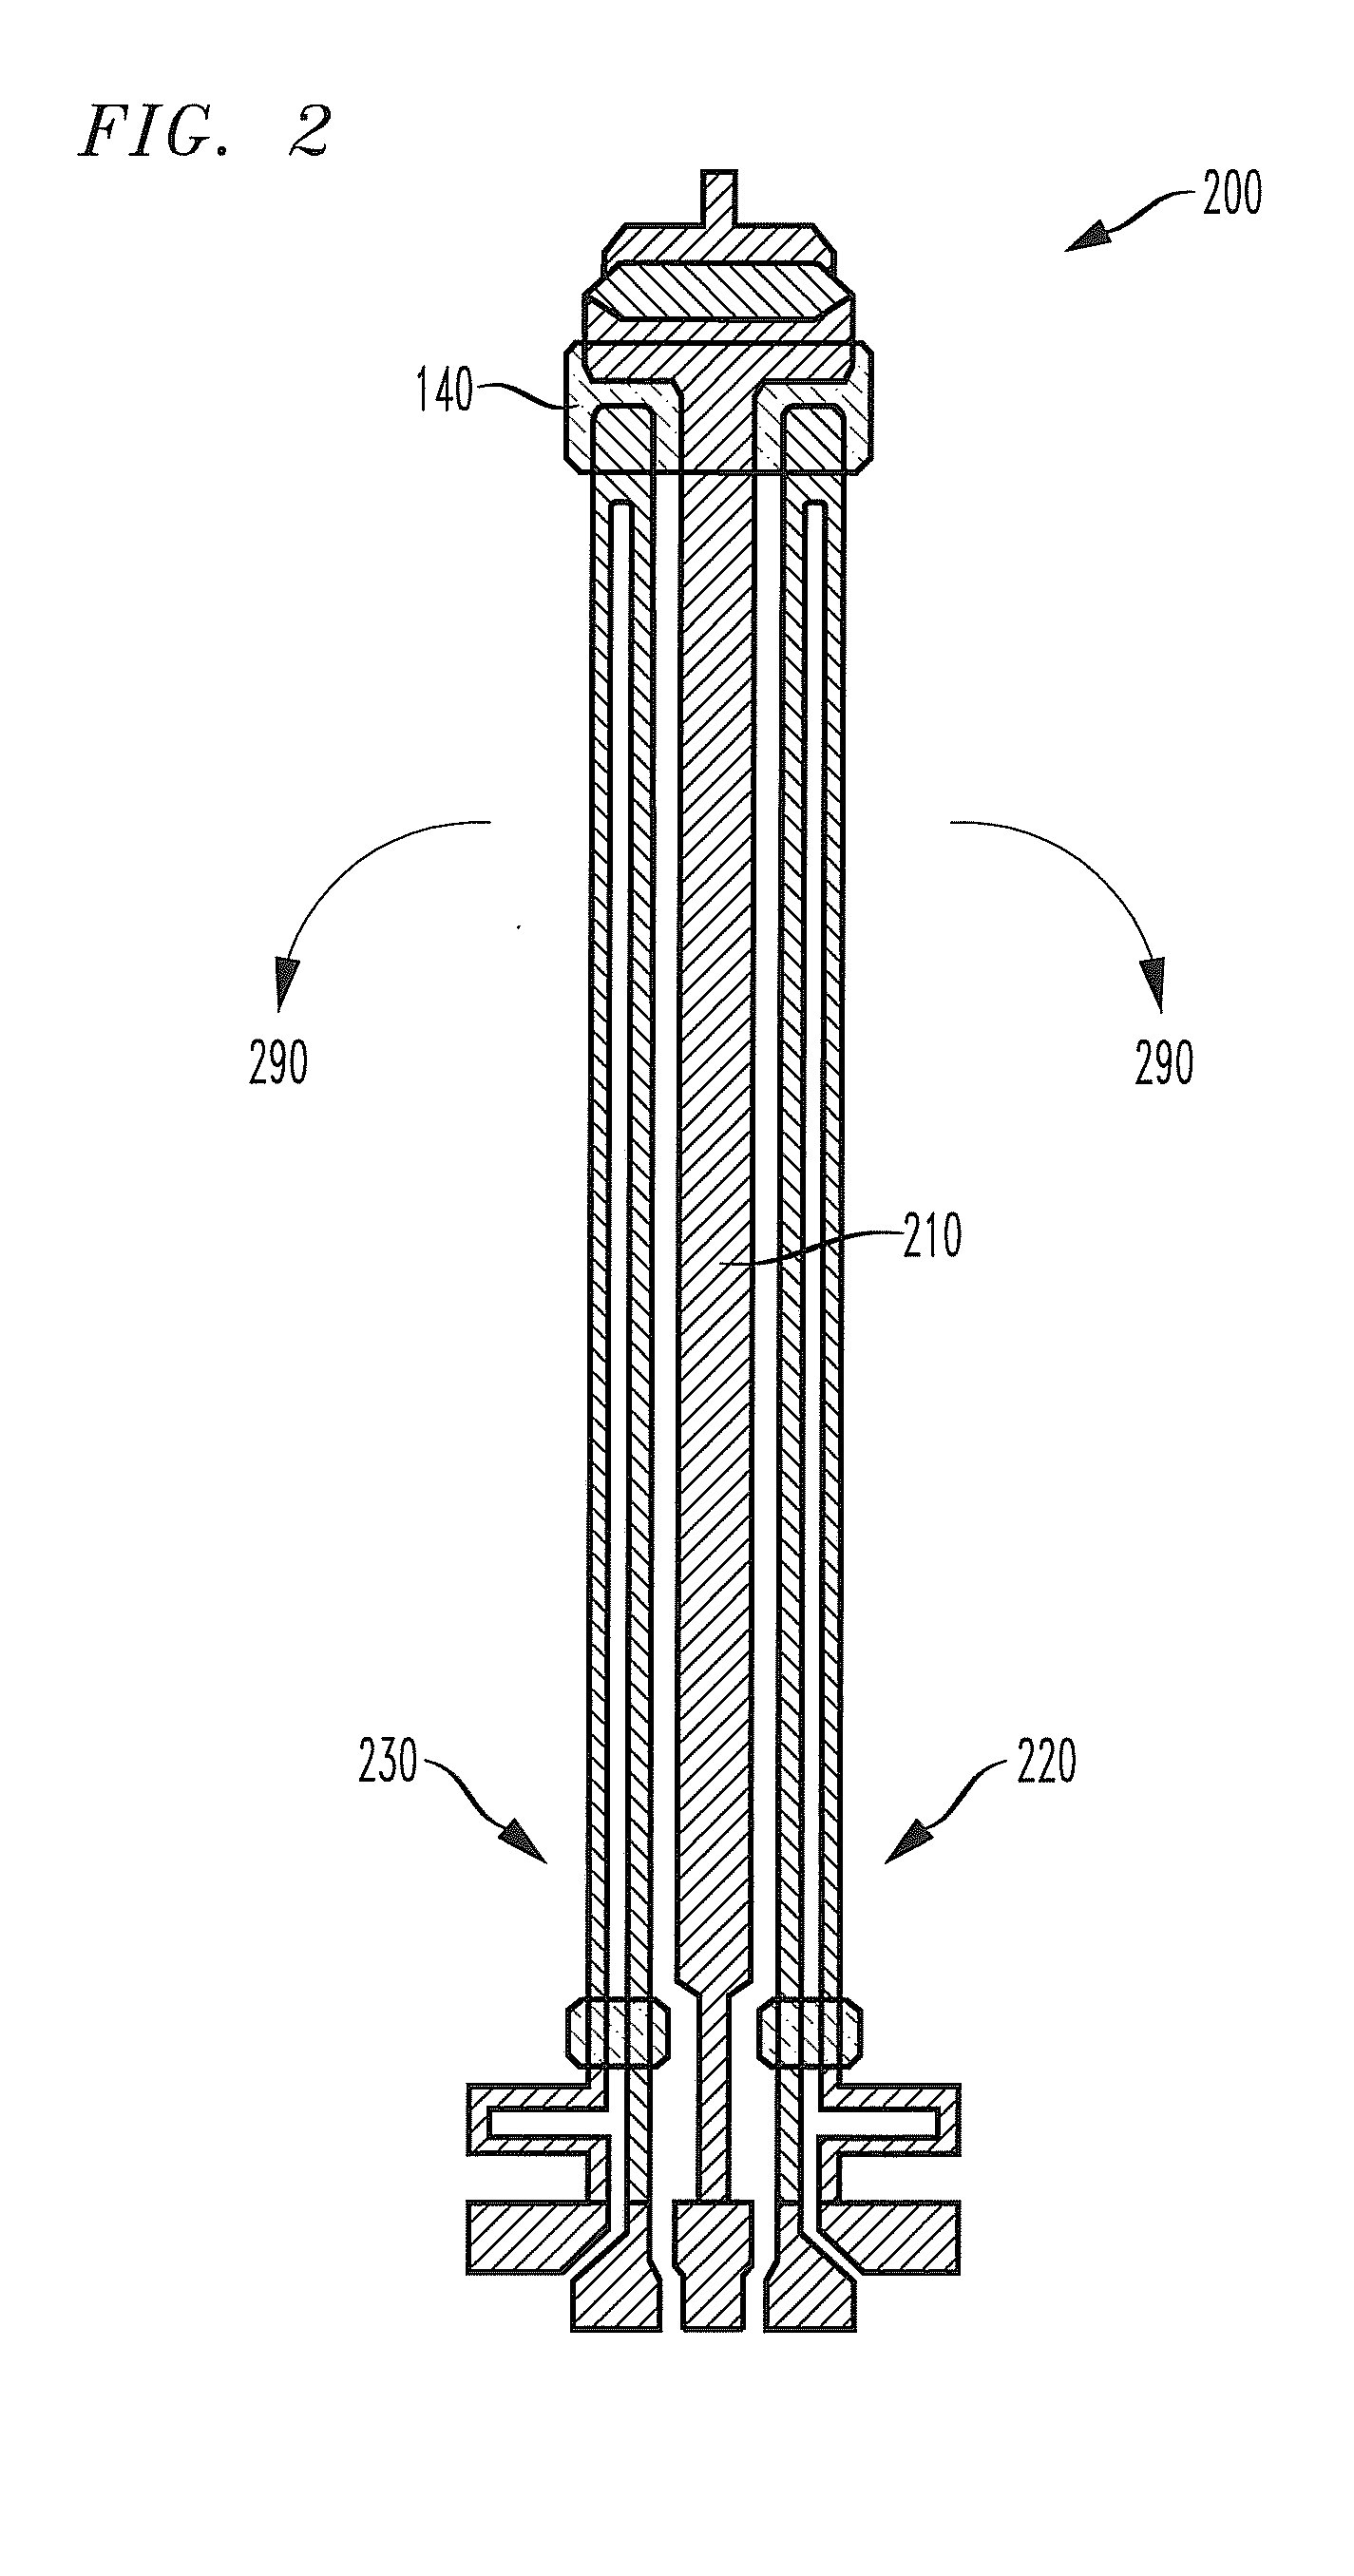 MEMS device with bi-directional element